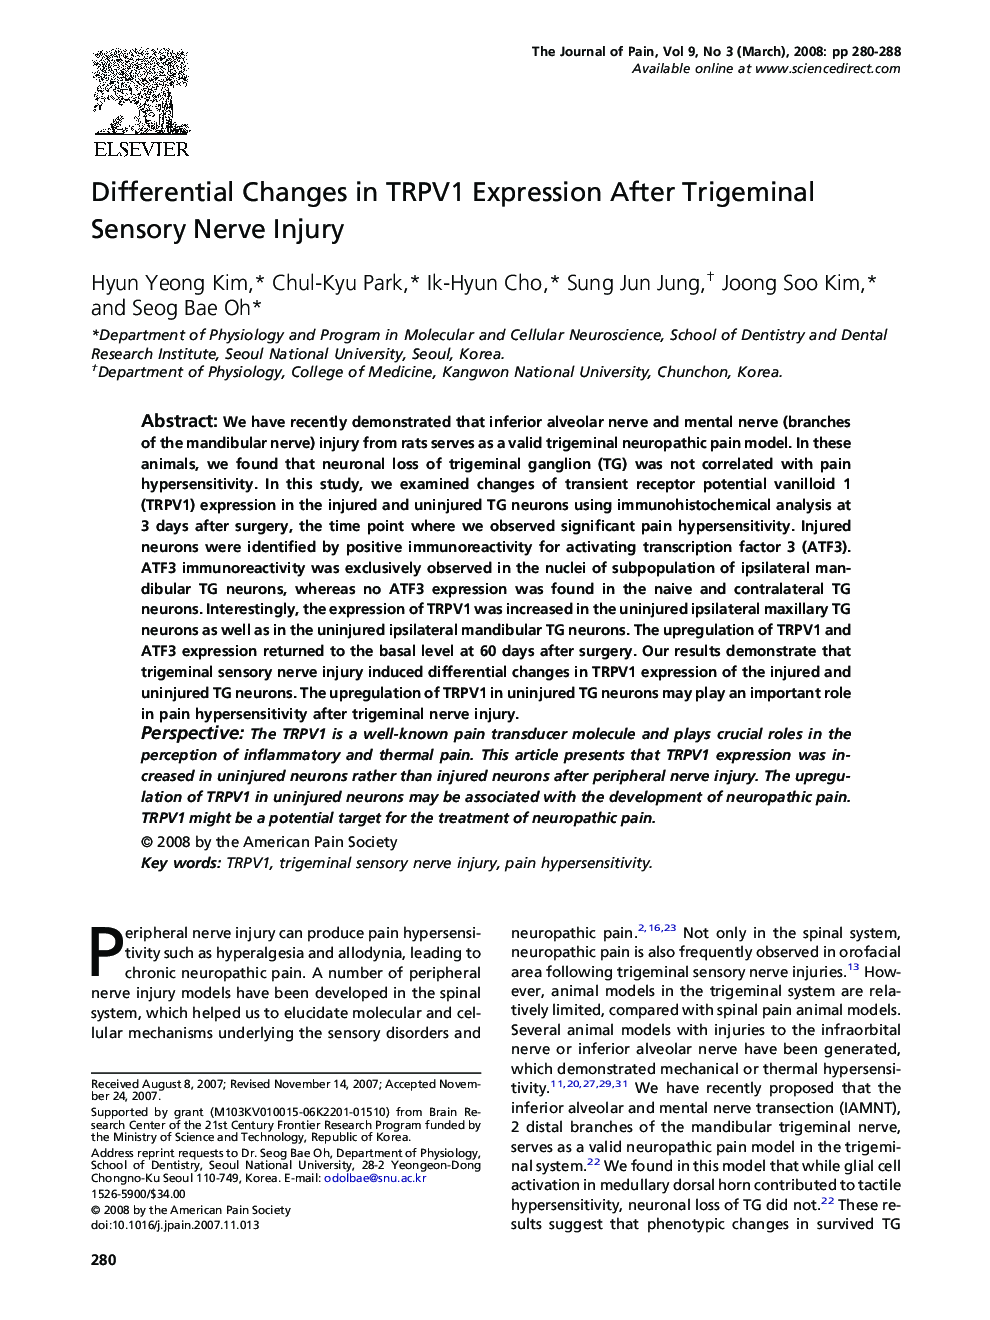 Differential Changes in TRPV1 Expression After Trigeminal Sensory Nerve Injury 